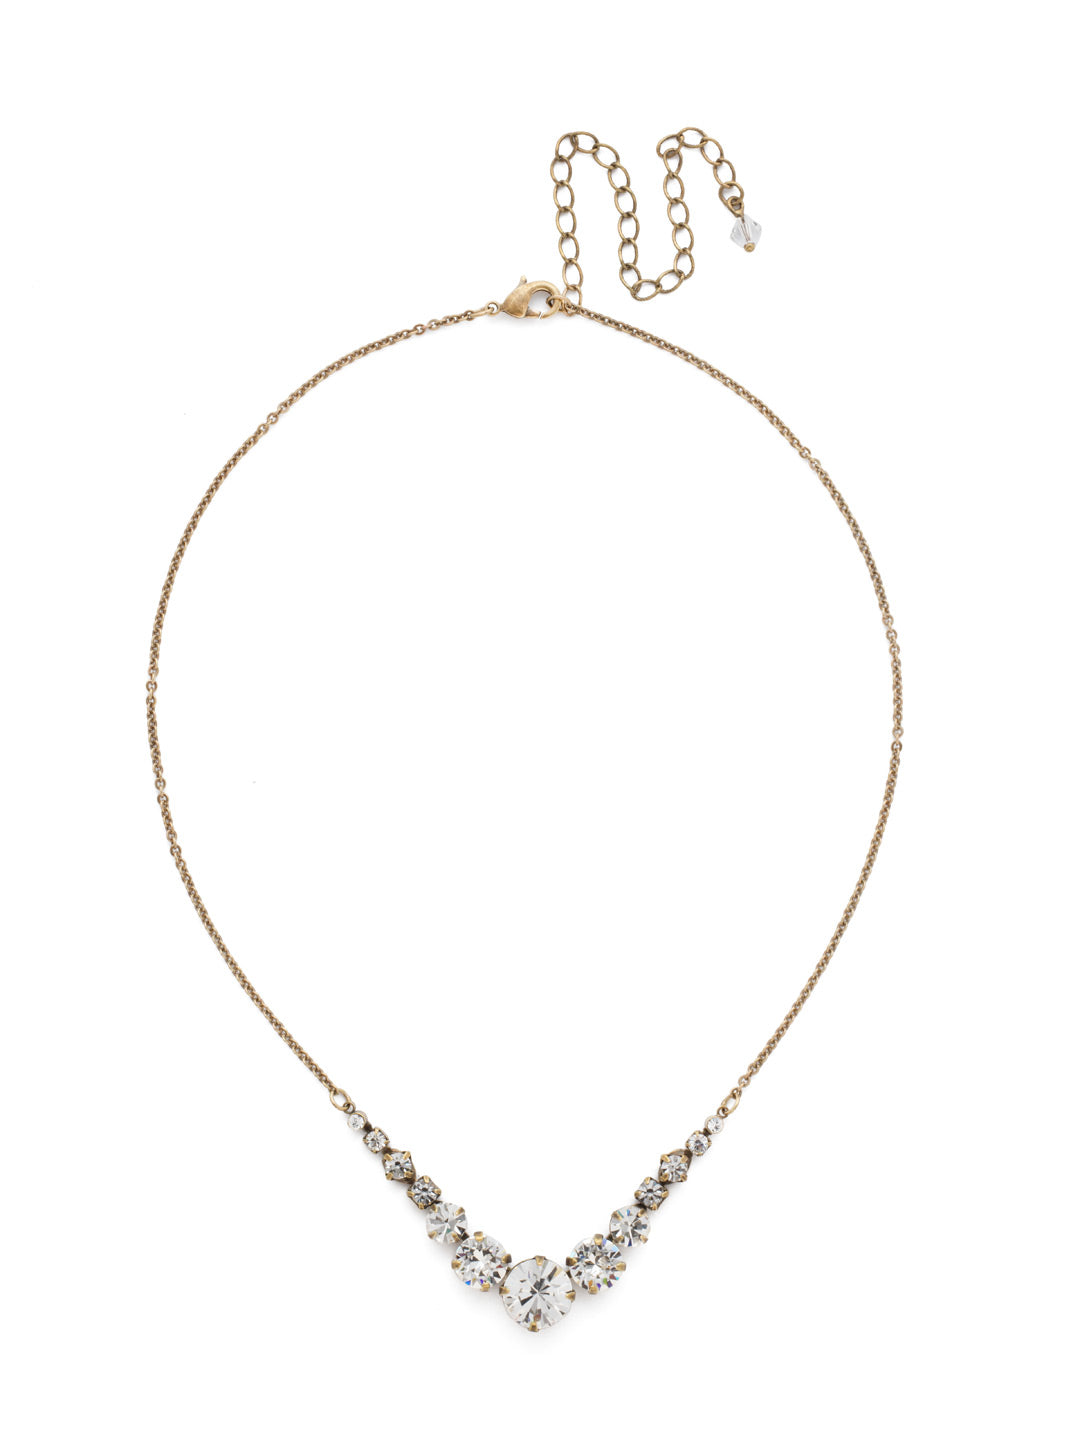 London Tennis Necklace - NCQ14AGCRY - <p>A long, simple chain paired with gorgeous round stones is exactly what every girl needs to dress things up. This round stone necklace is perfect for layering, or to just wear alone. Let the simple sparkle take over. From Sorrelli's Crystal collection in our Antique Gold-tone finish.</p>